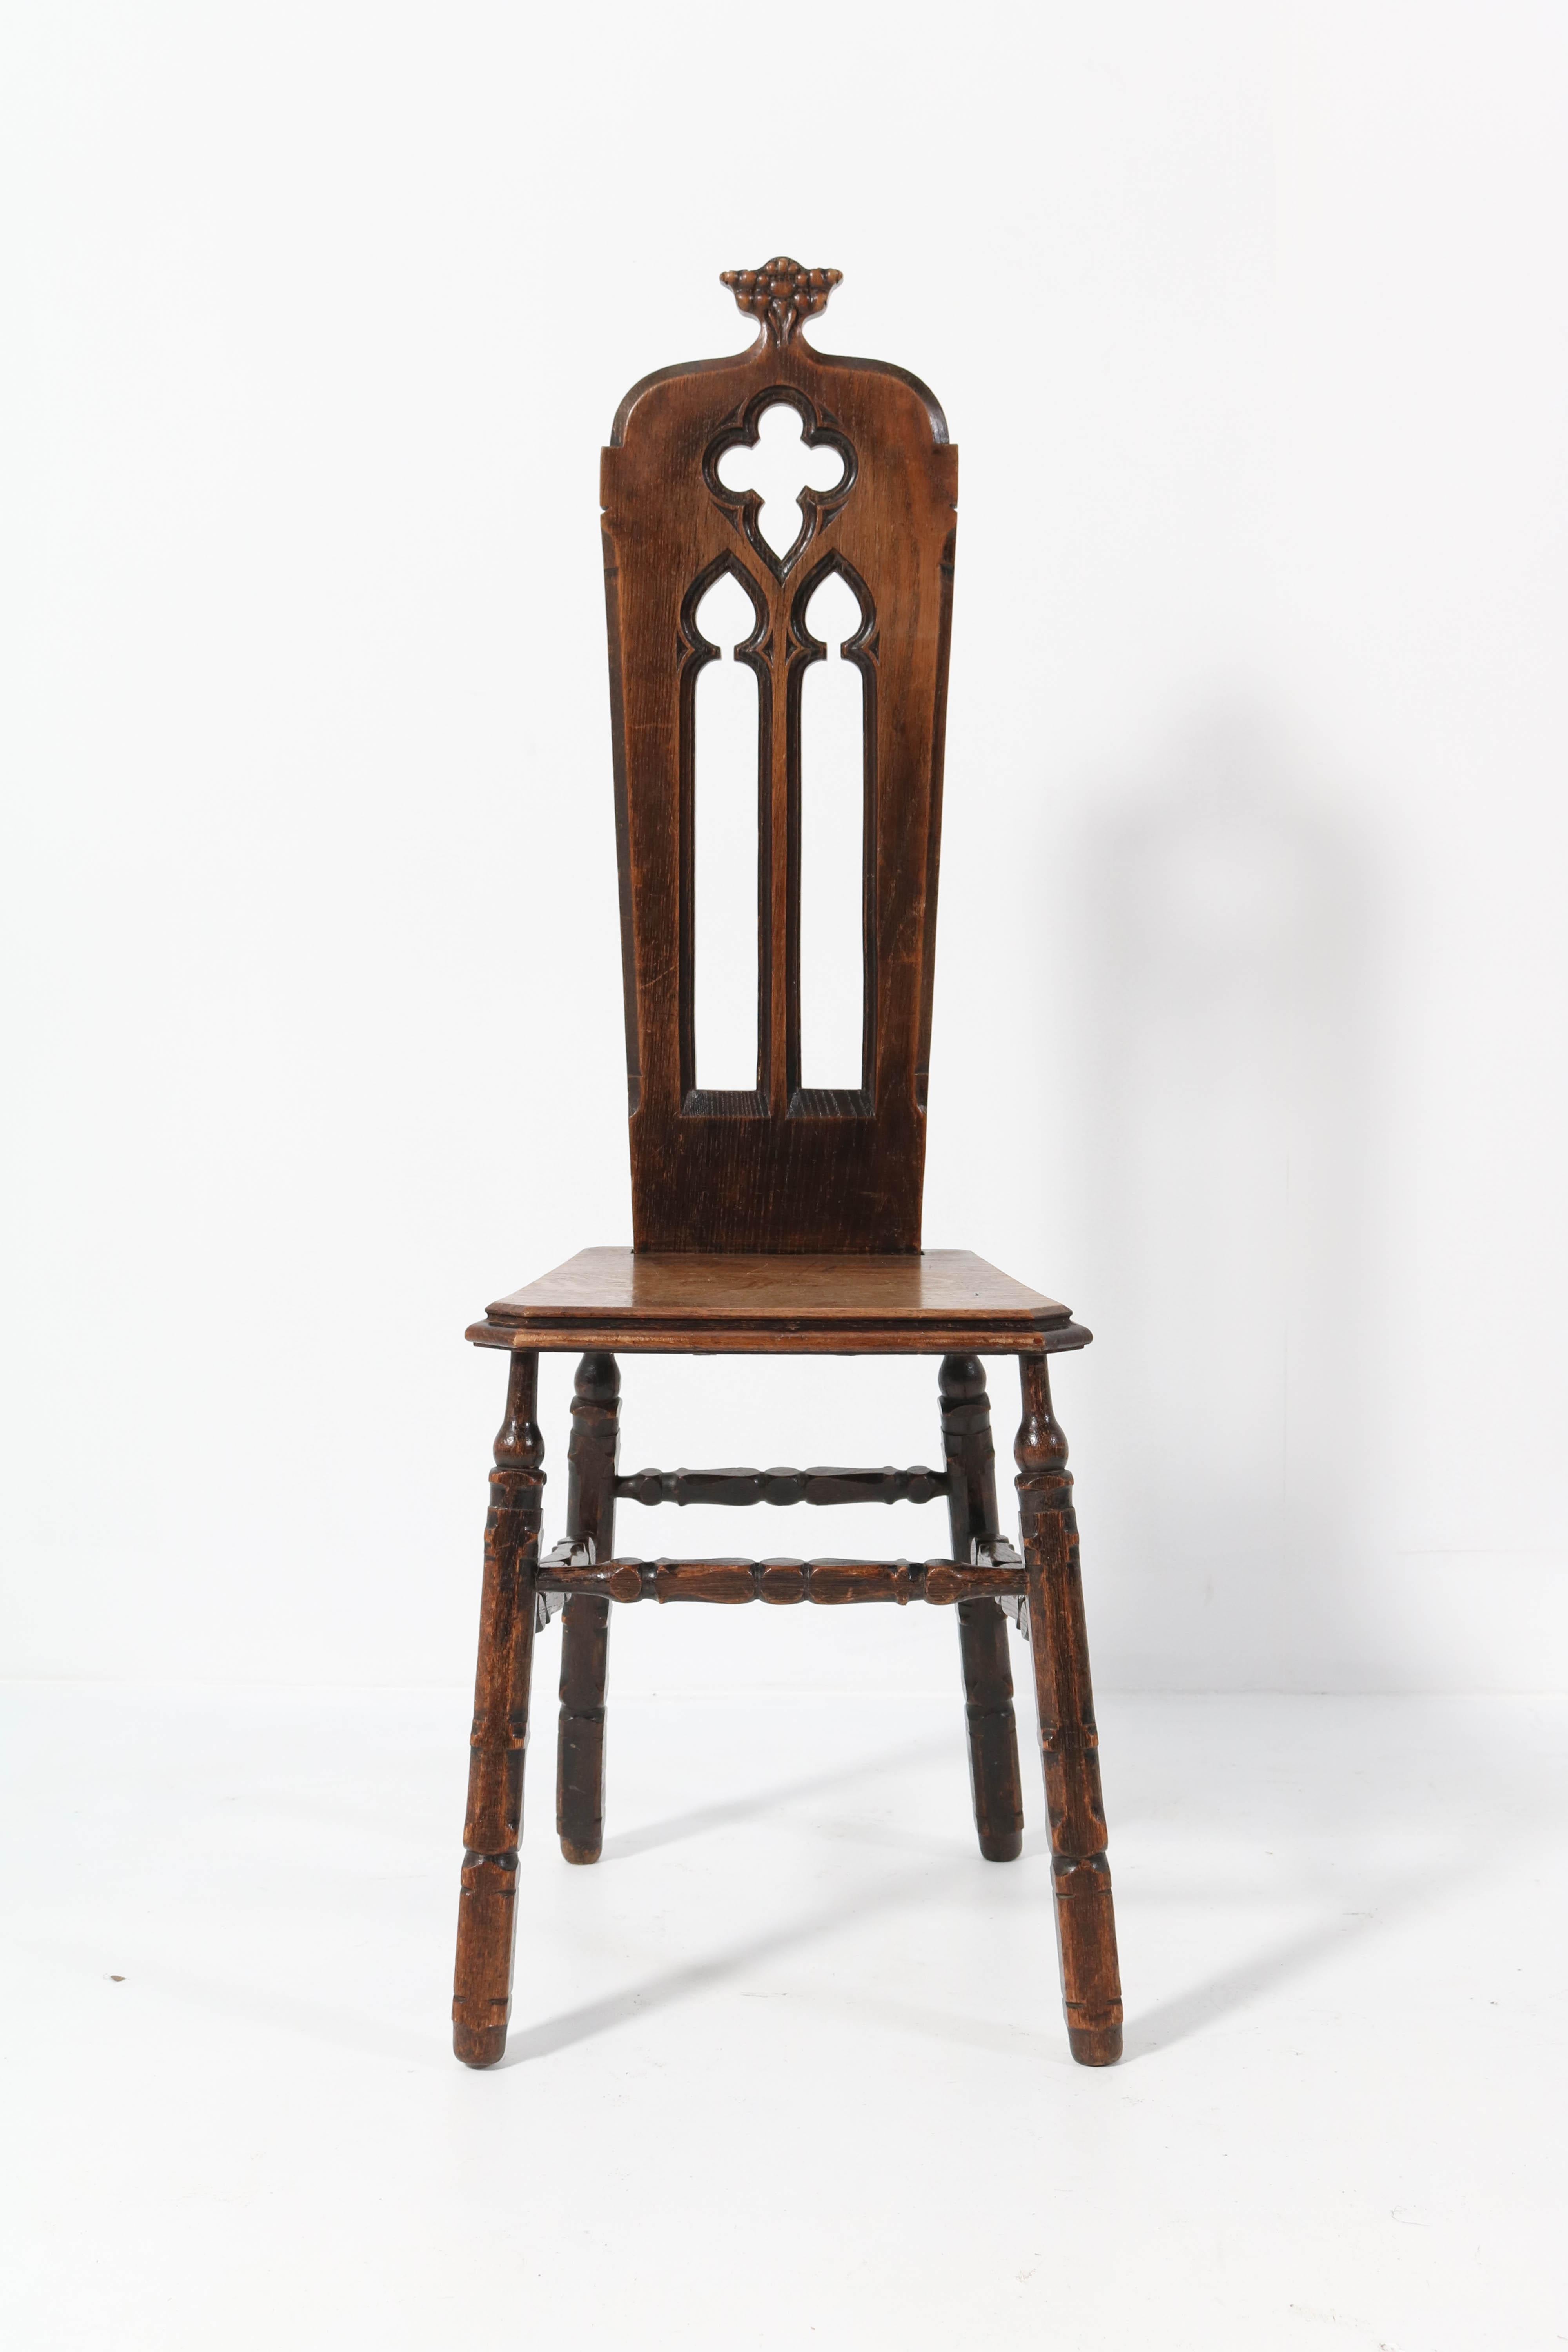 Wonderful Gothic Revival side chair.
Striking French design from the 1920s.
Solid oak with hand carved details.
In very good condition with minor wear consistent with age and use,
preserving a beautiful patina.